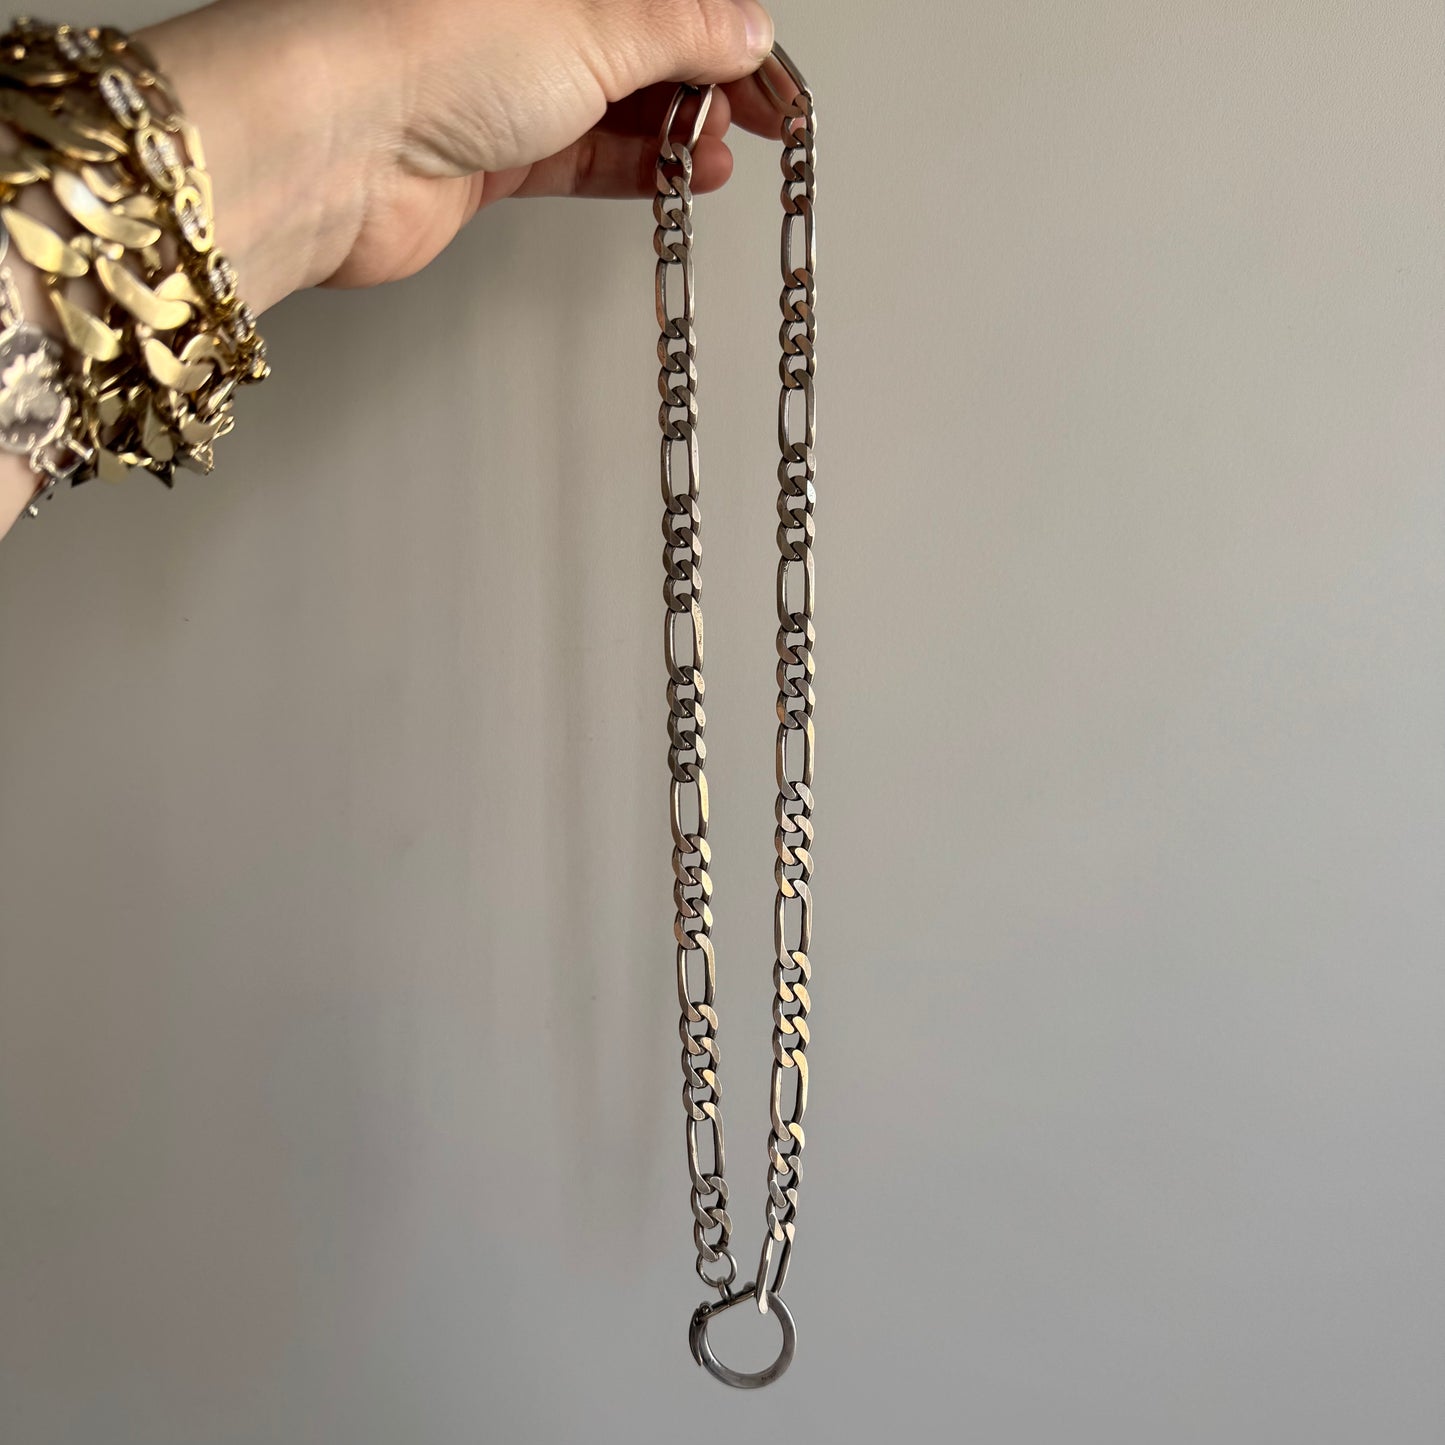 reimagined V I N T A G E // connected possibilities / sterling silver heavy figaro chain with connector clasp / 21", 52g